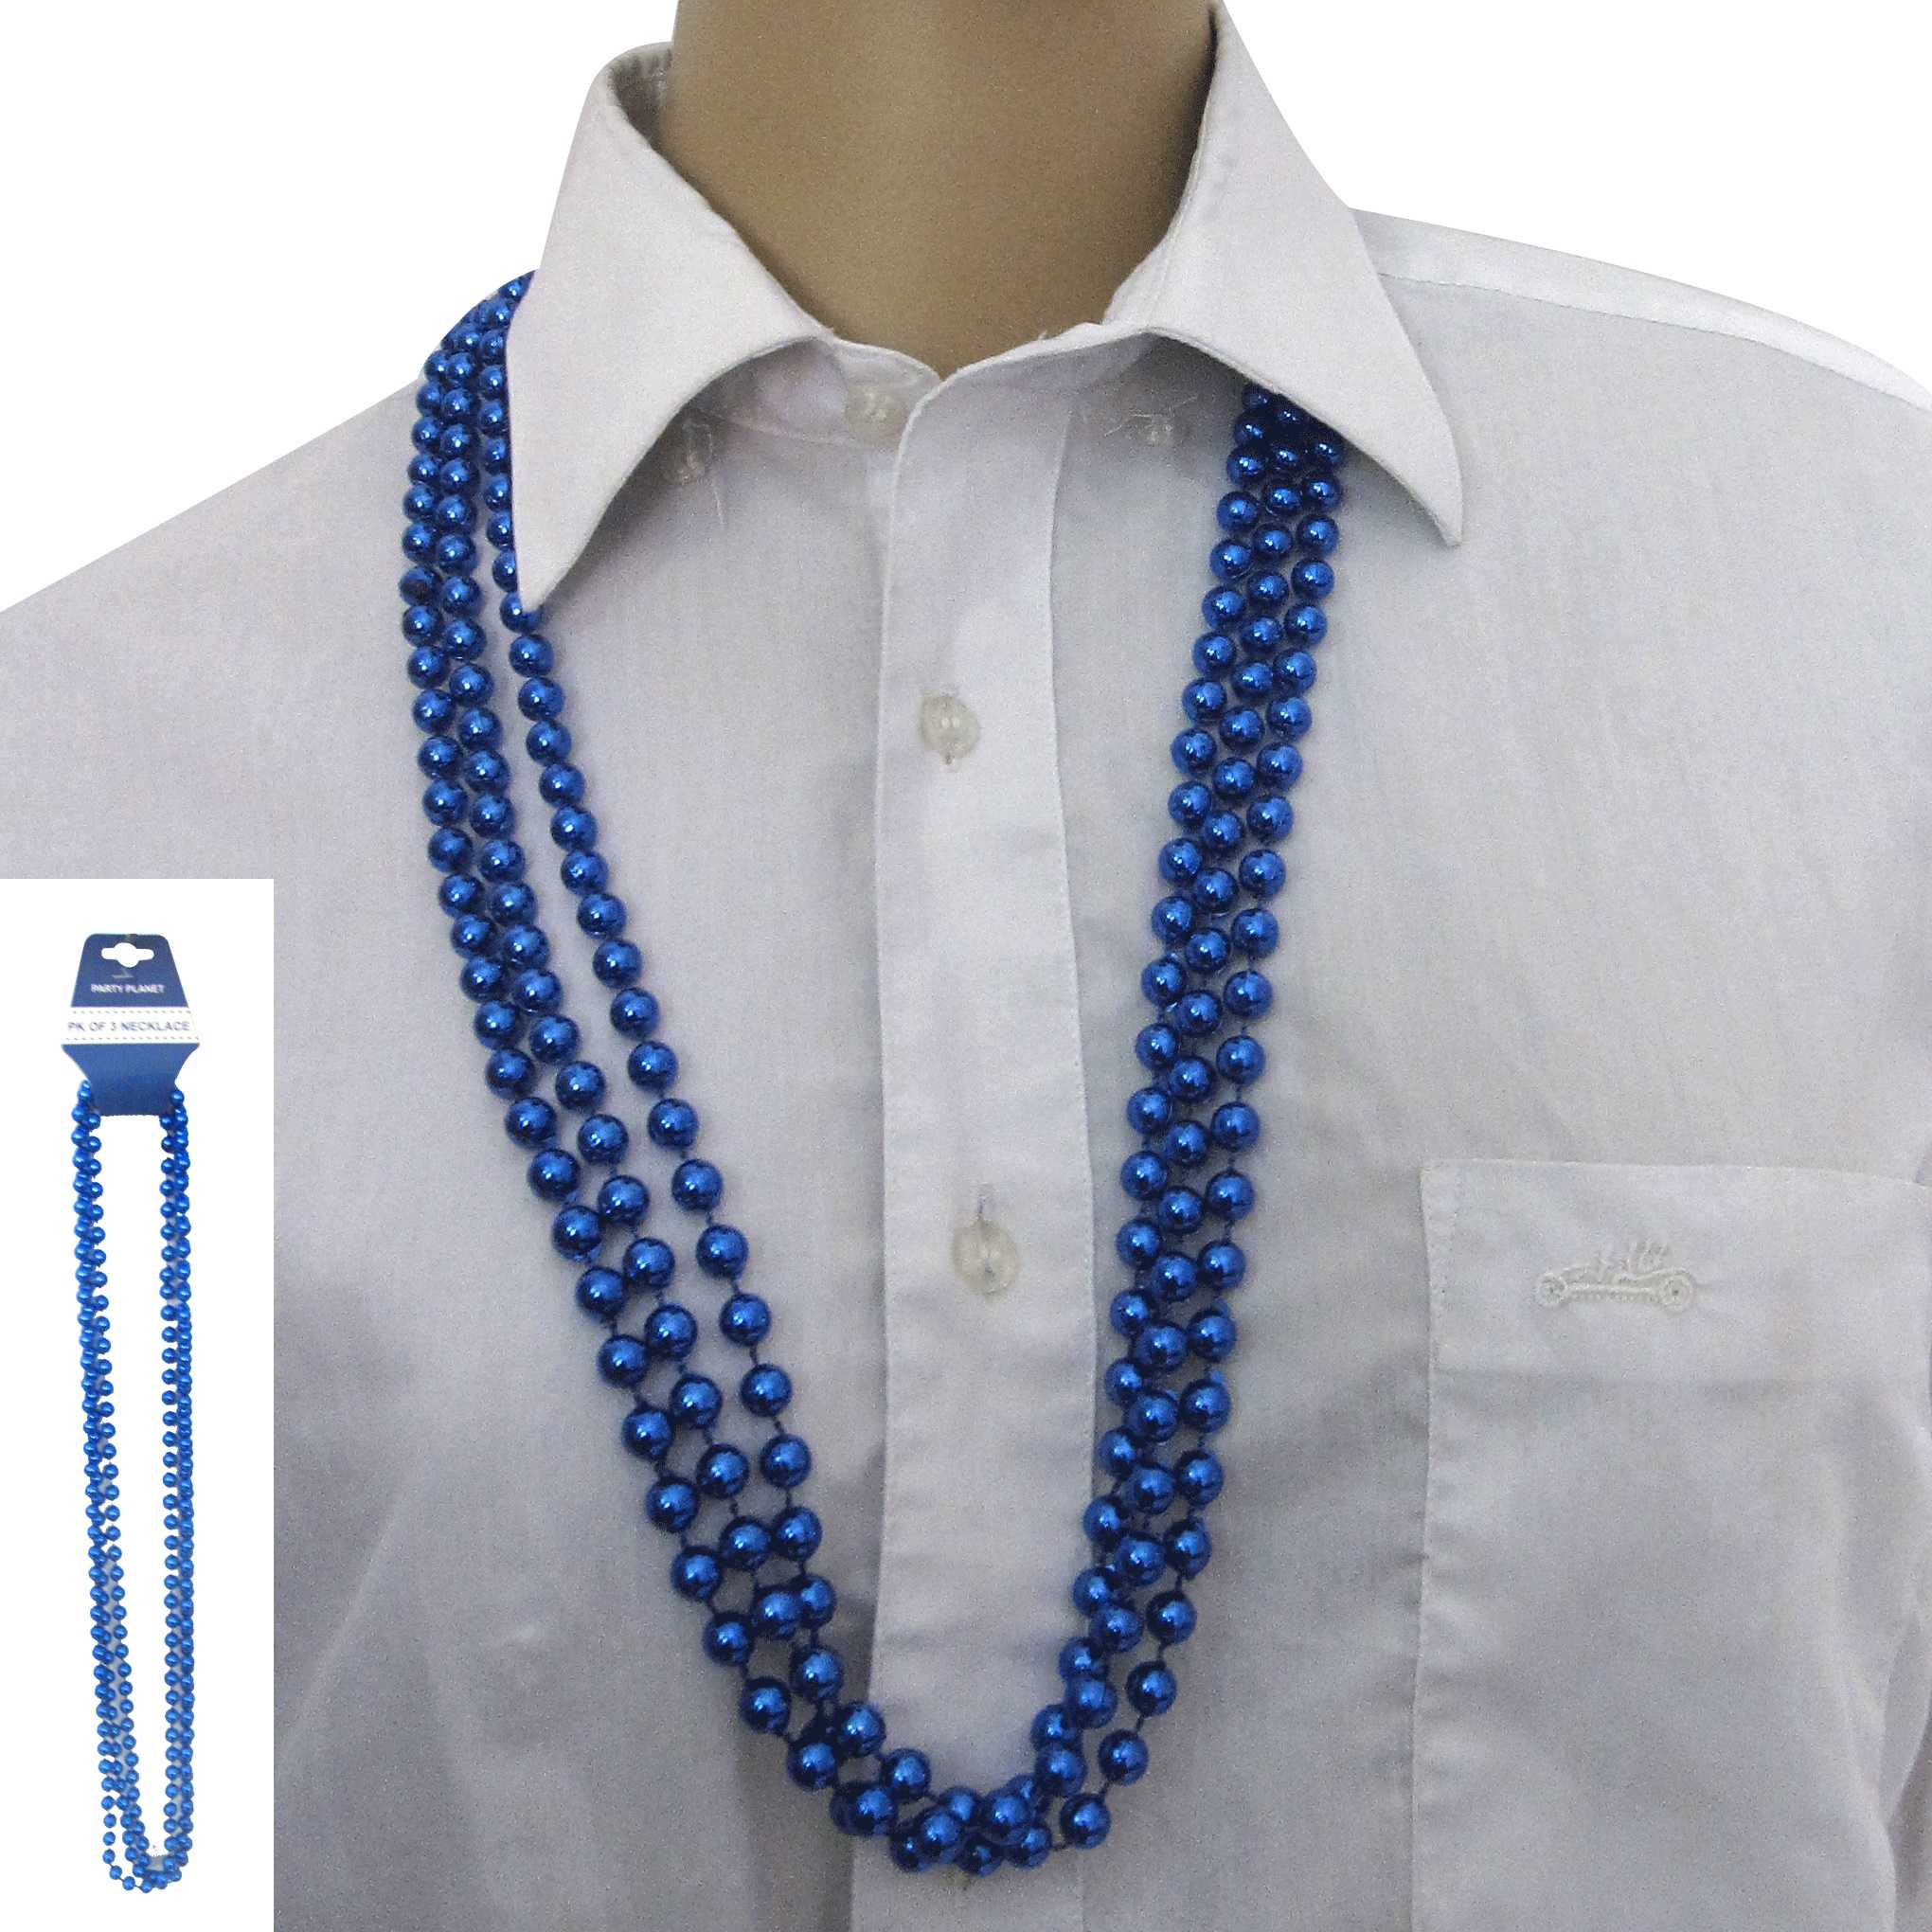 View Party Necklace Beaded 3pk Blue